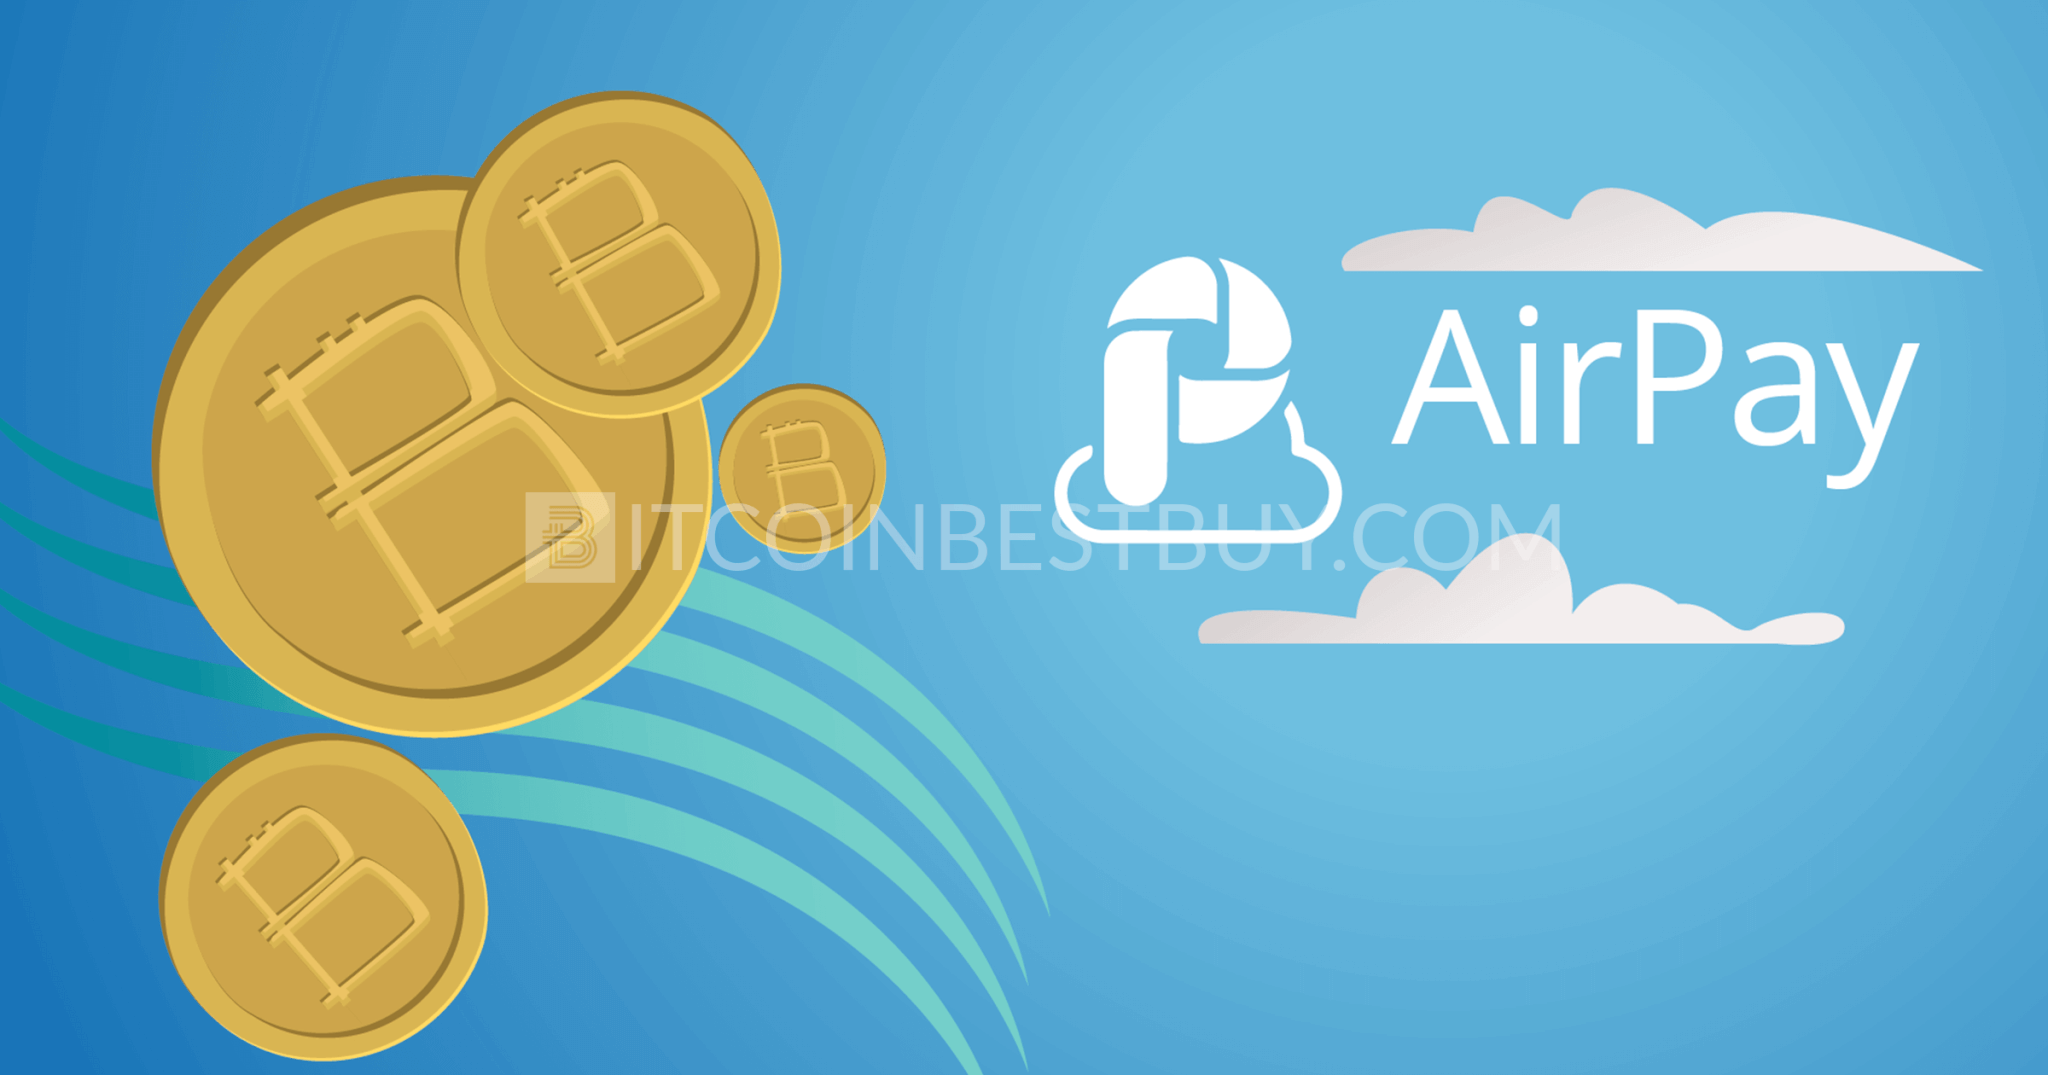 Buying BTC with AirPay